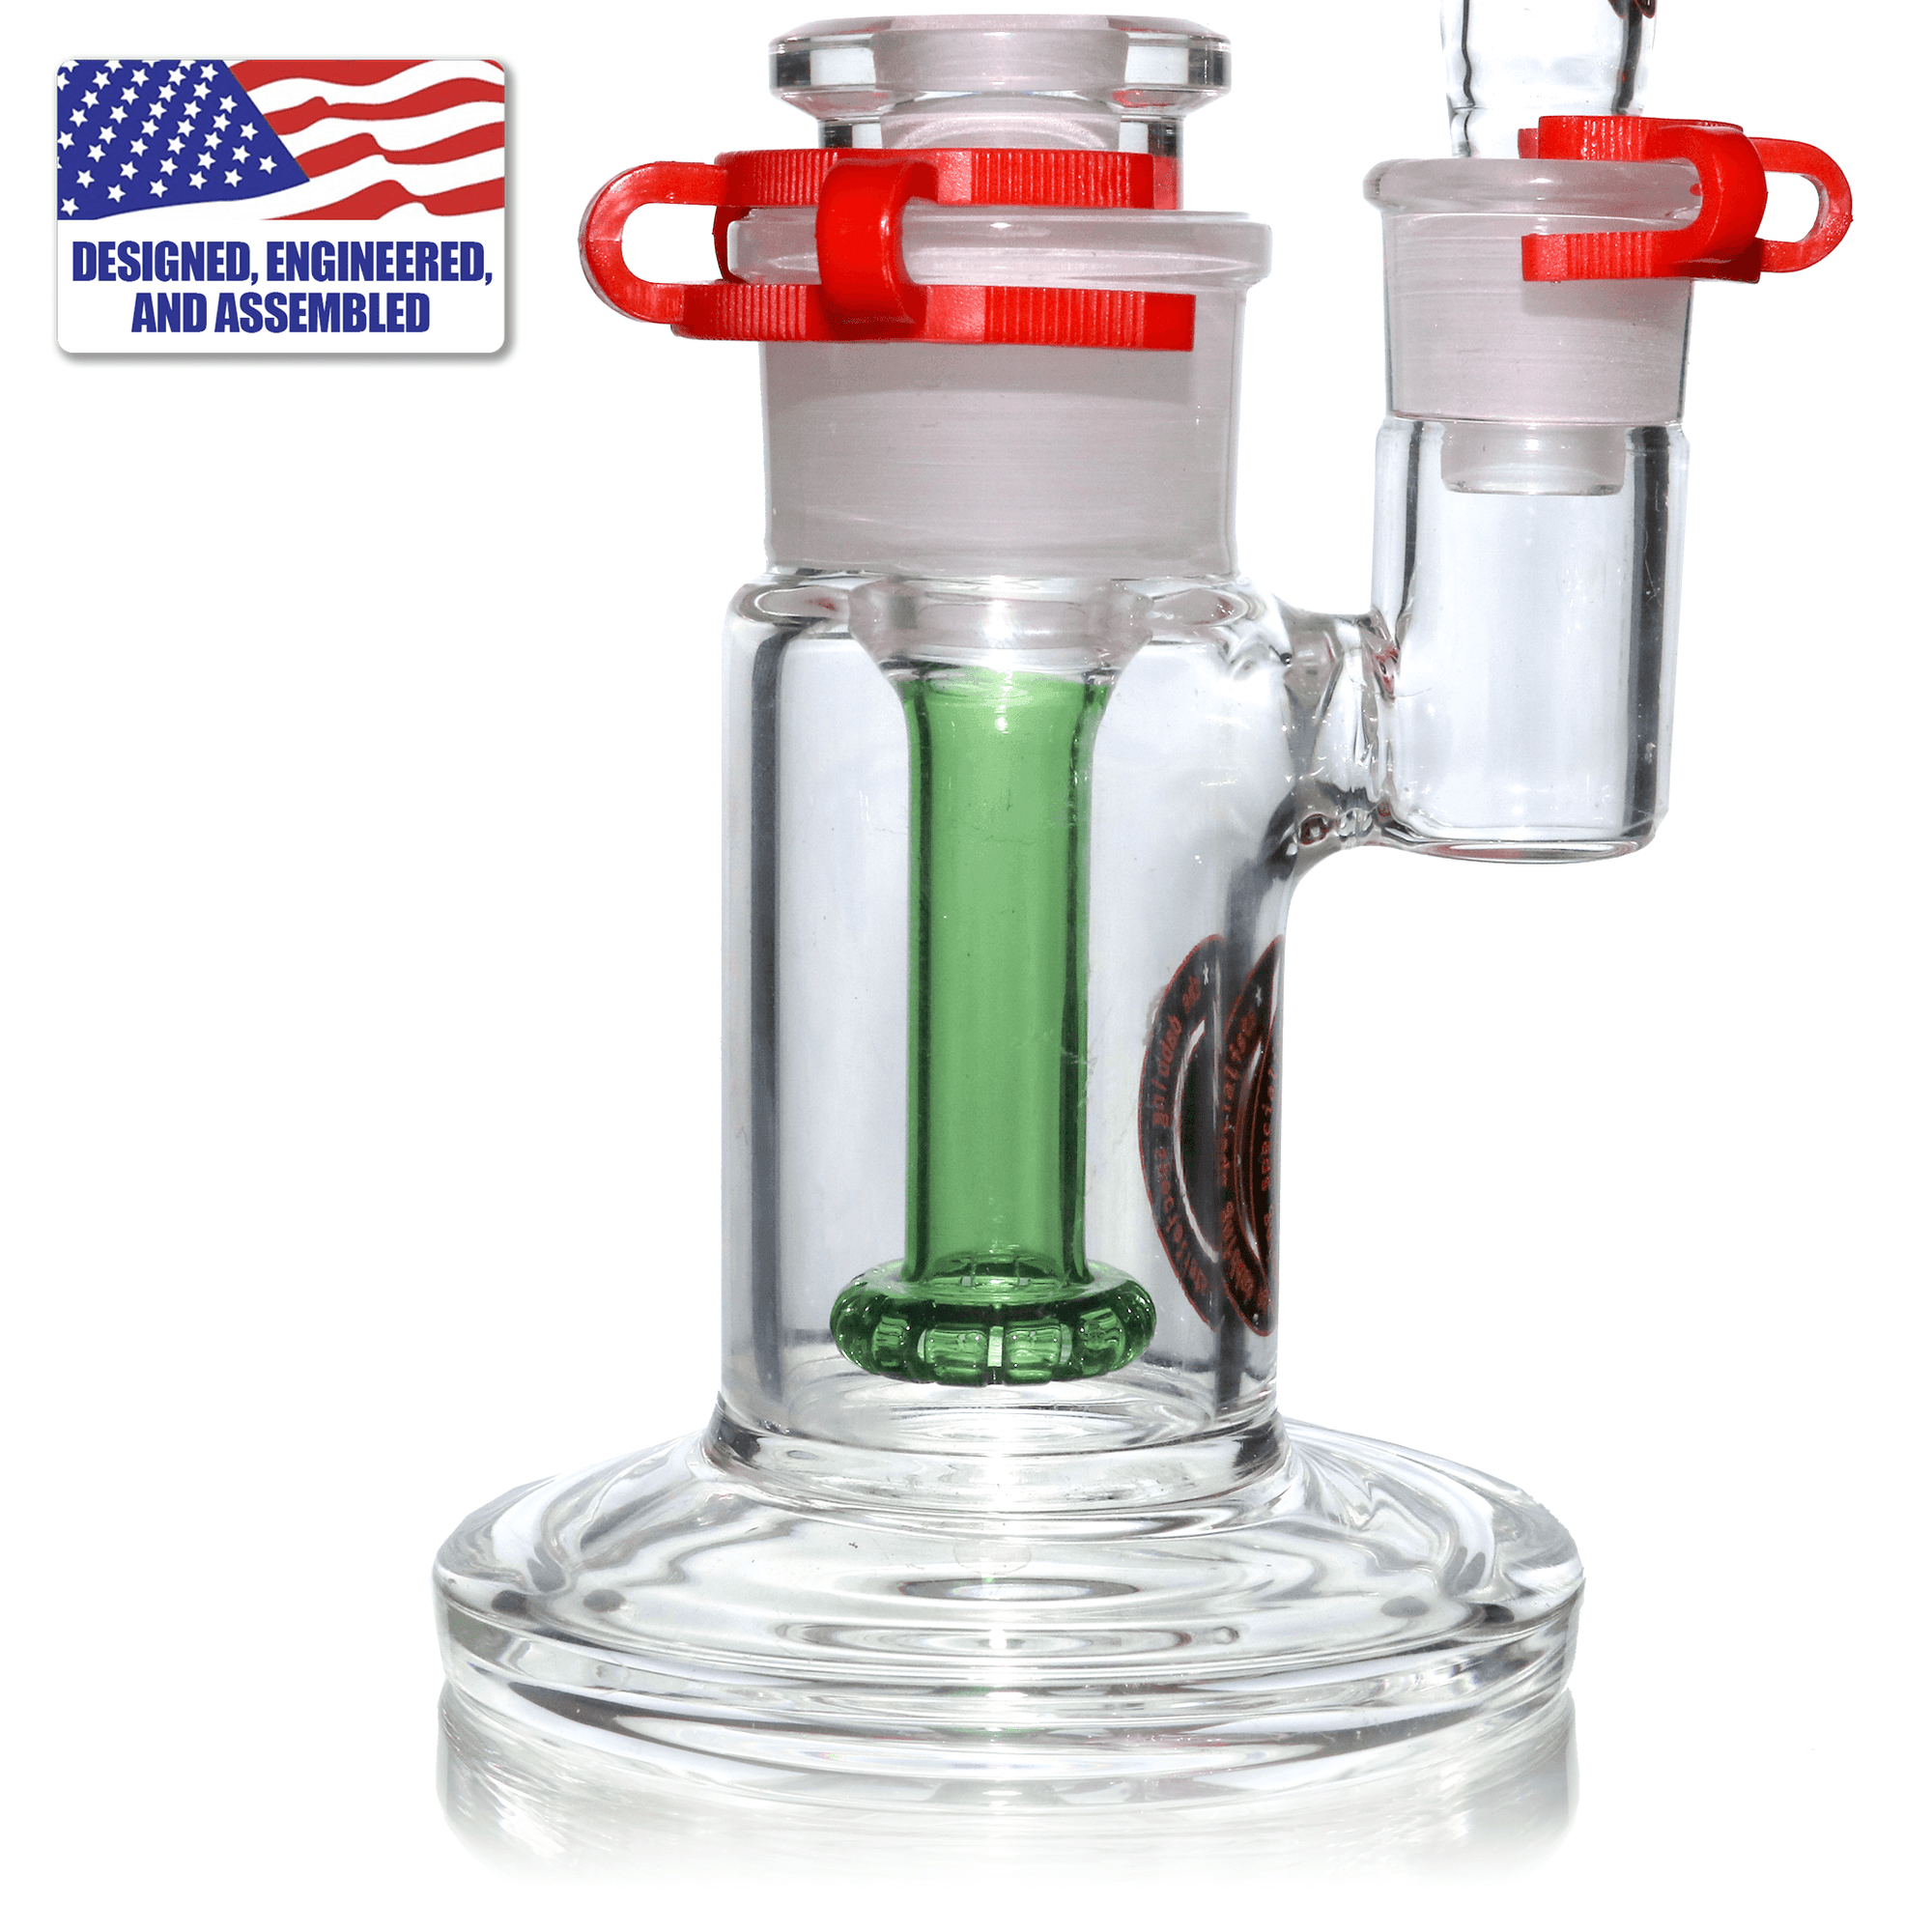 Portable Dab Kit | Showerhead Bubbler | E-Banger for 16mm Coil | Close Up Dab Rig View | DW